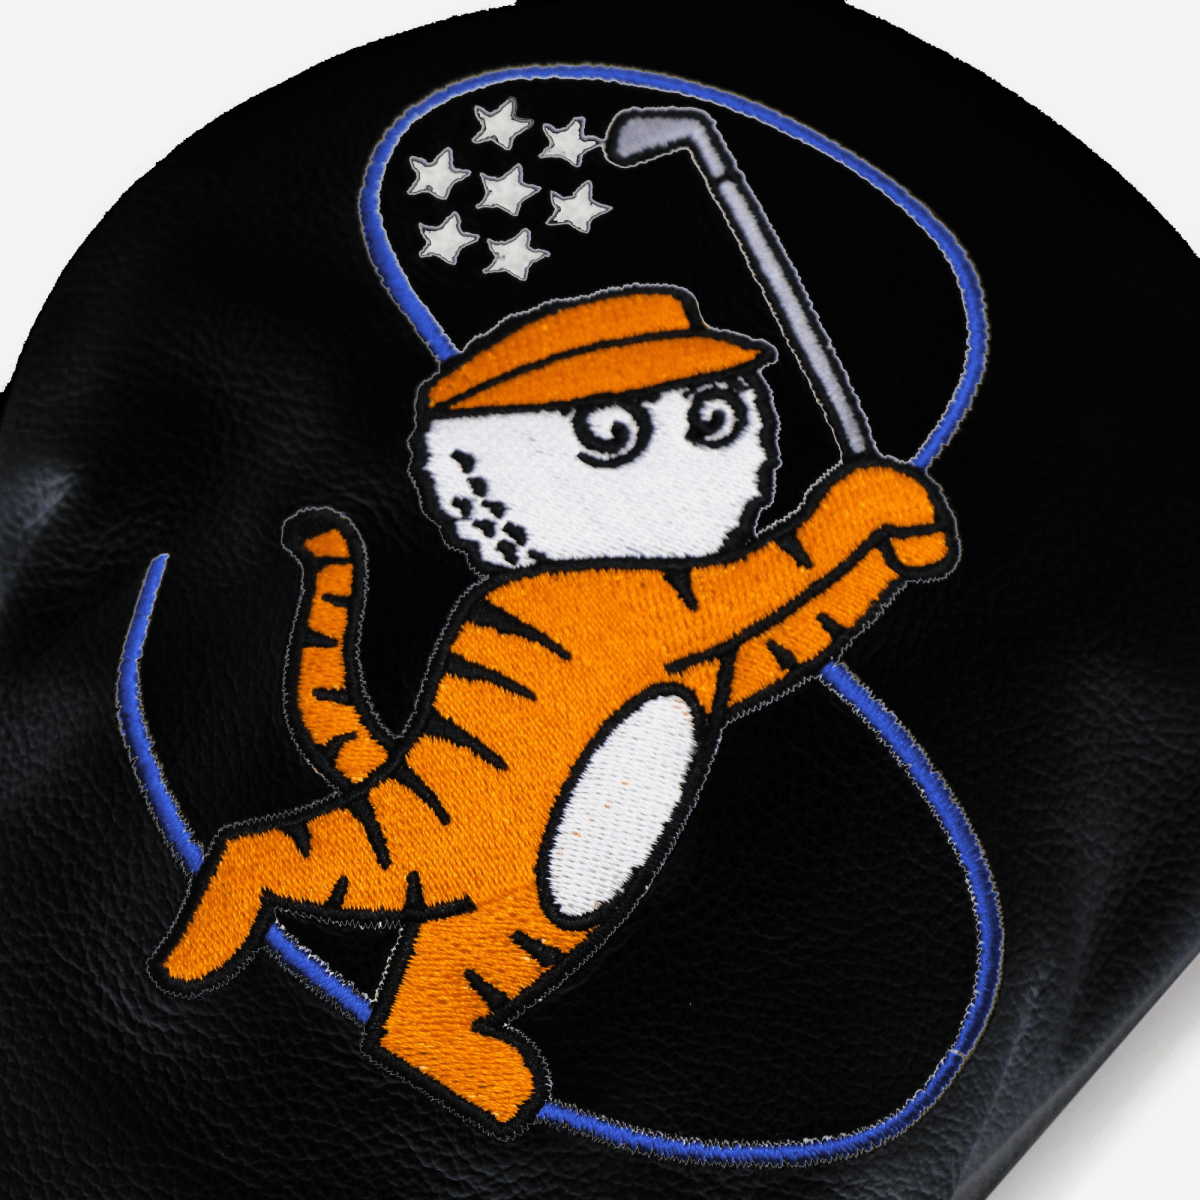 Malbon Golf Releases New Tiger Buckets Headcovers - Airows